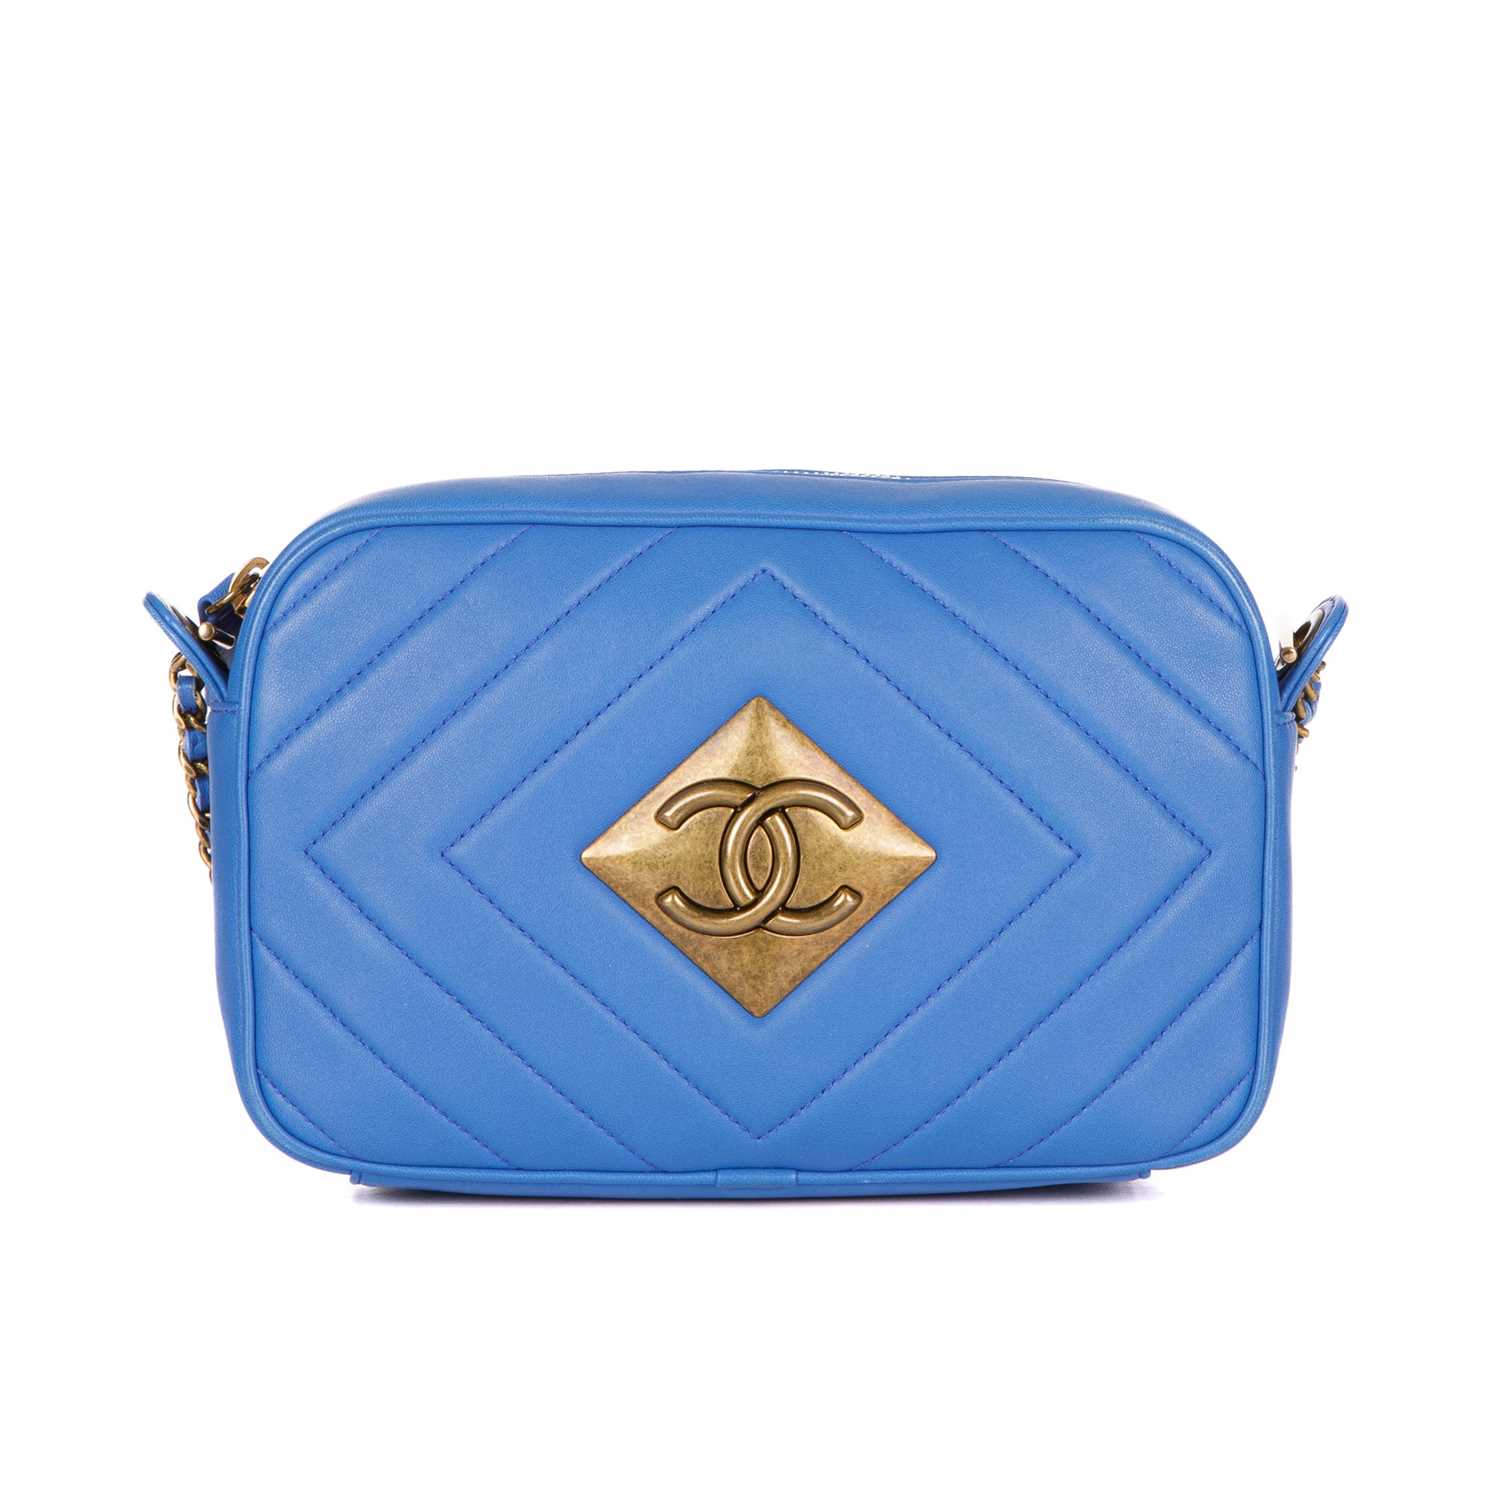 Chanel, a Pyramid camera bag, featuring a blue diamond-quilted leather exterior, with aged gold-tone